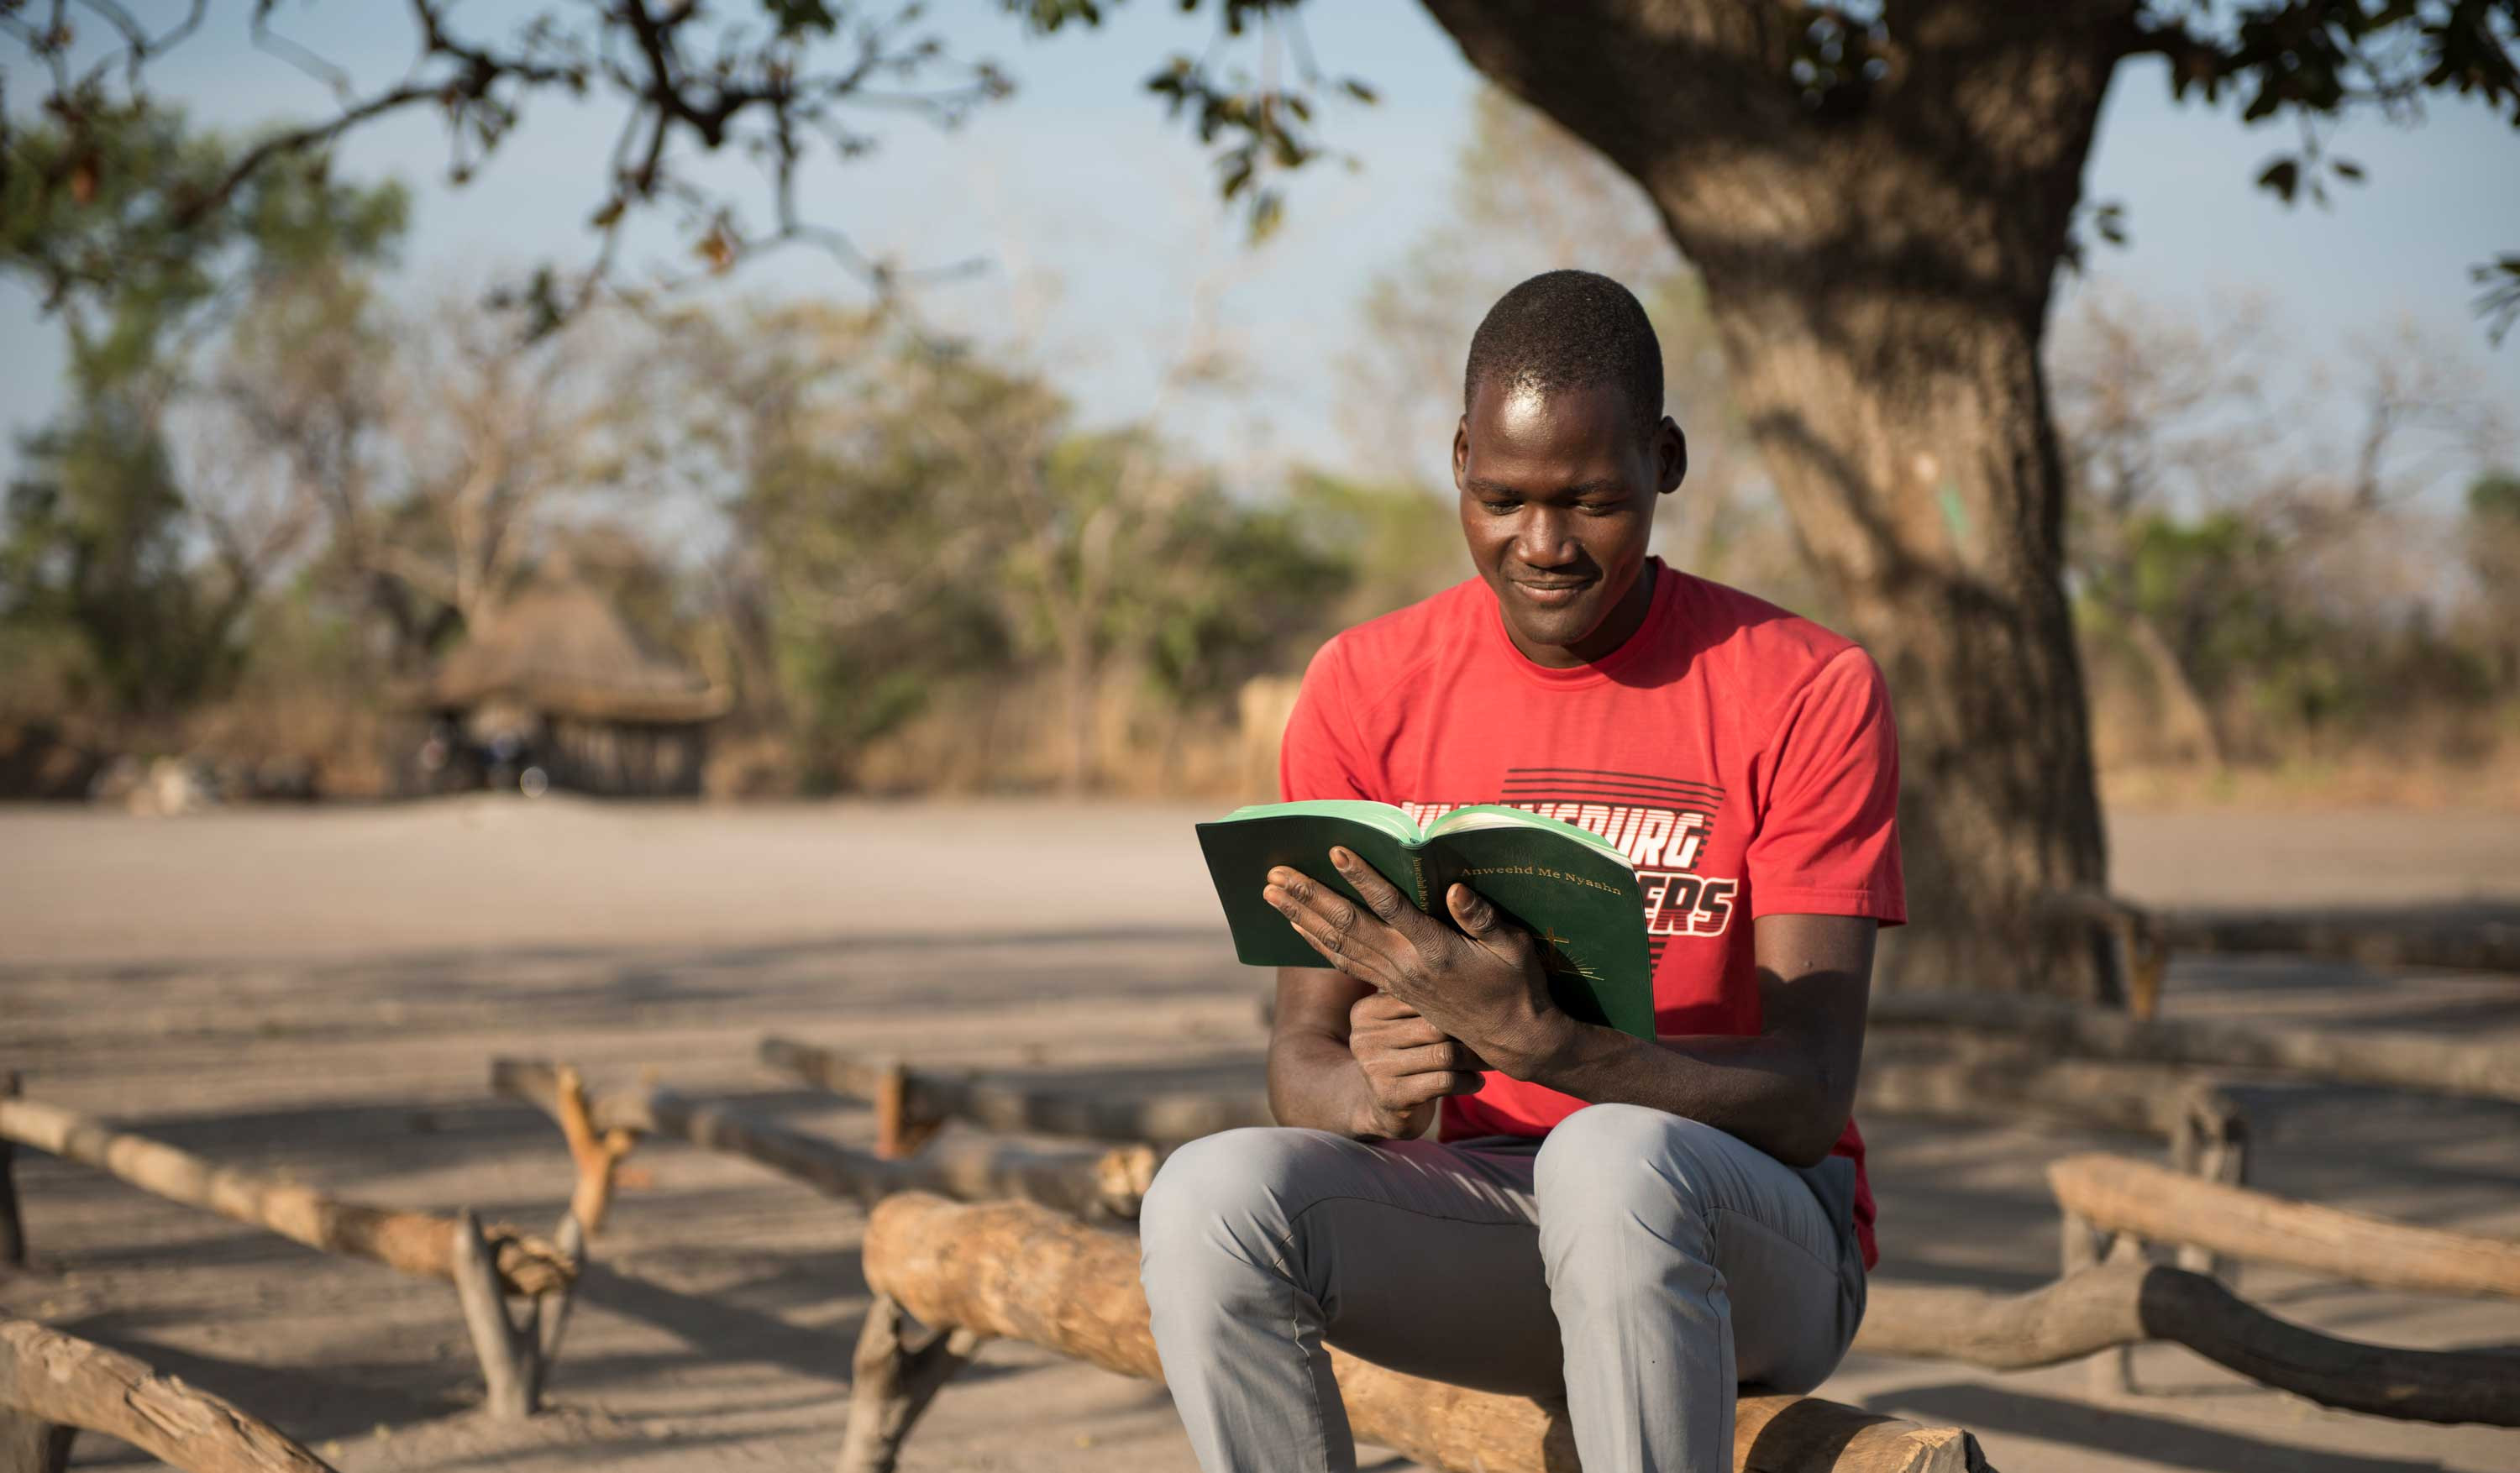 A South Sudanese evangelist reads his bible.